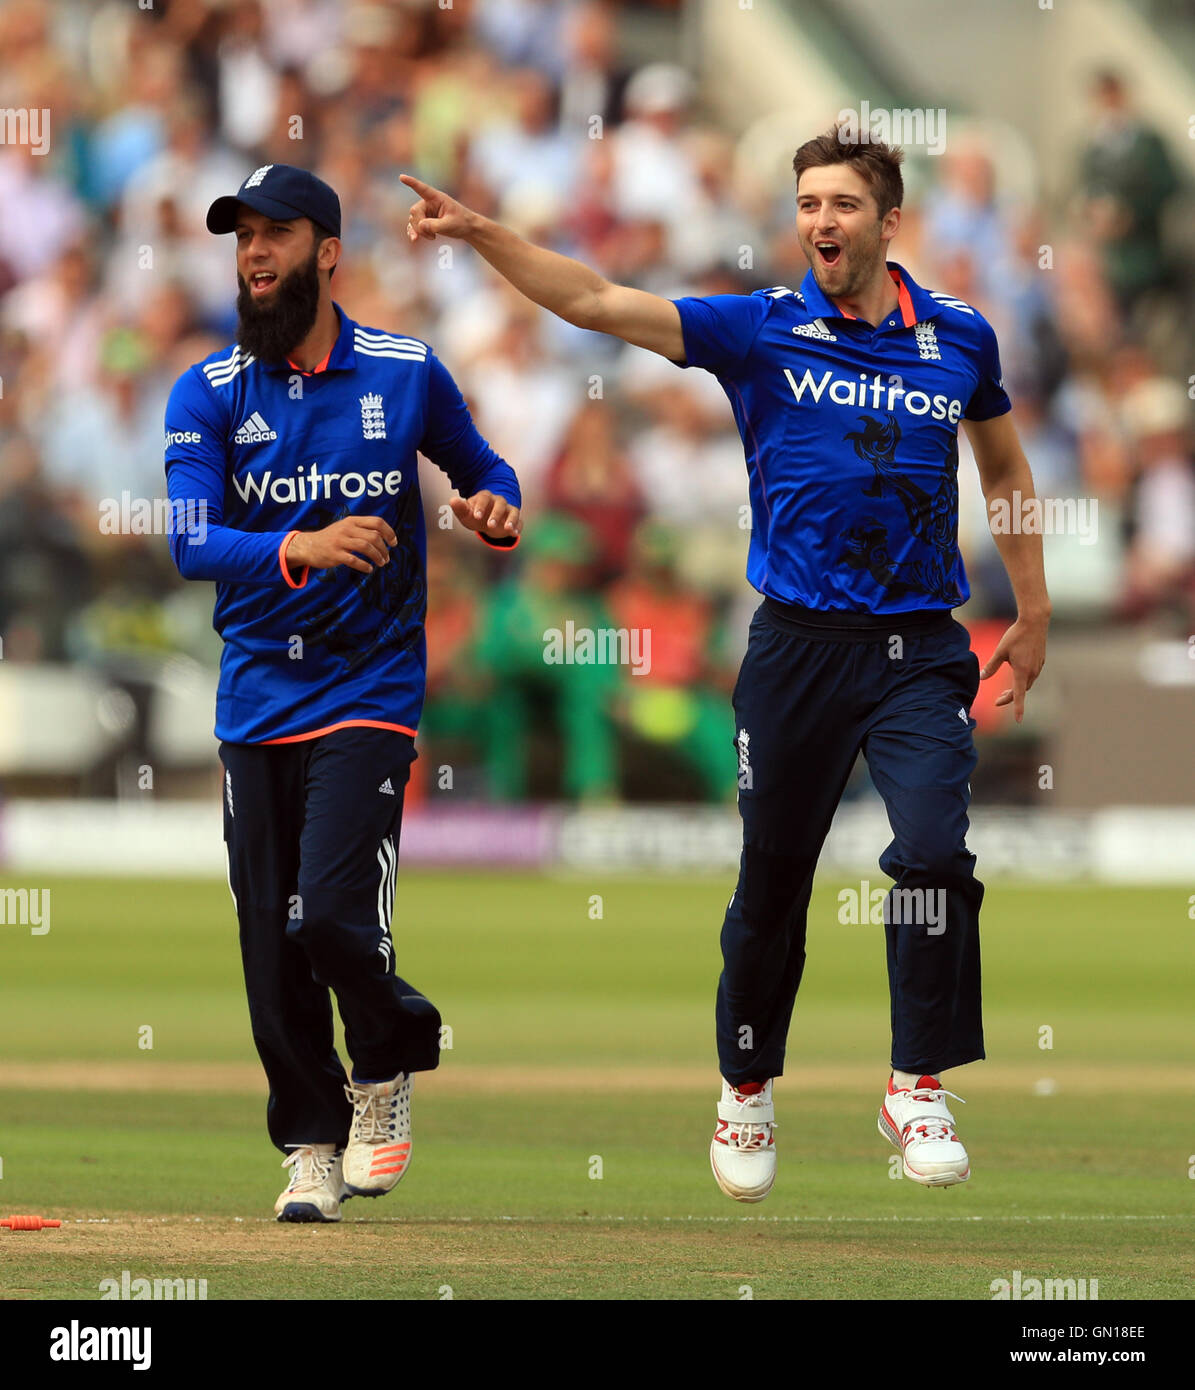 England's Mark Wood celebrates taking the wicket of Pakistan's Sharjeel Khan during the Royal London One Day International Series match at Lord's, London. Stock Photo